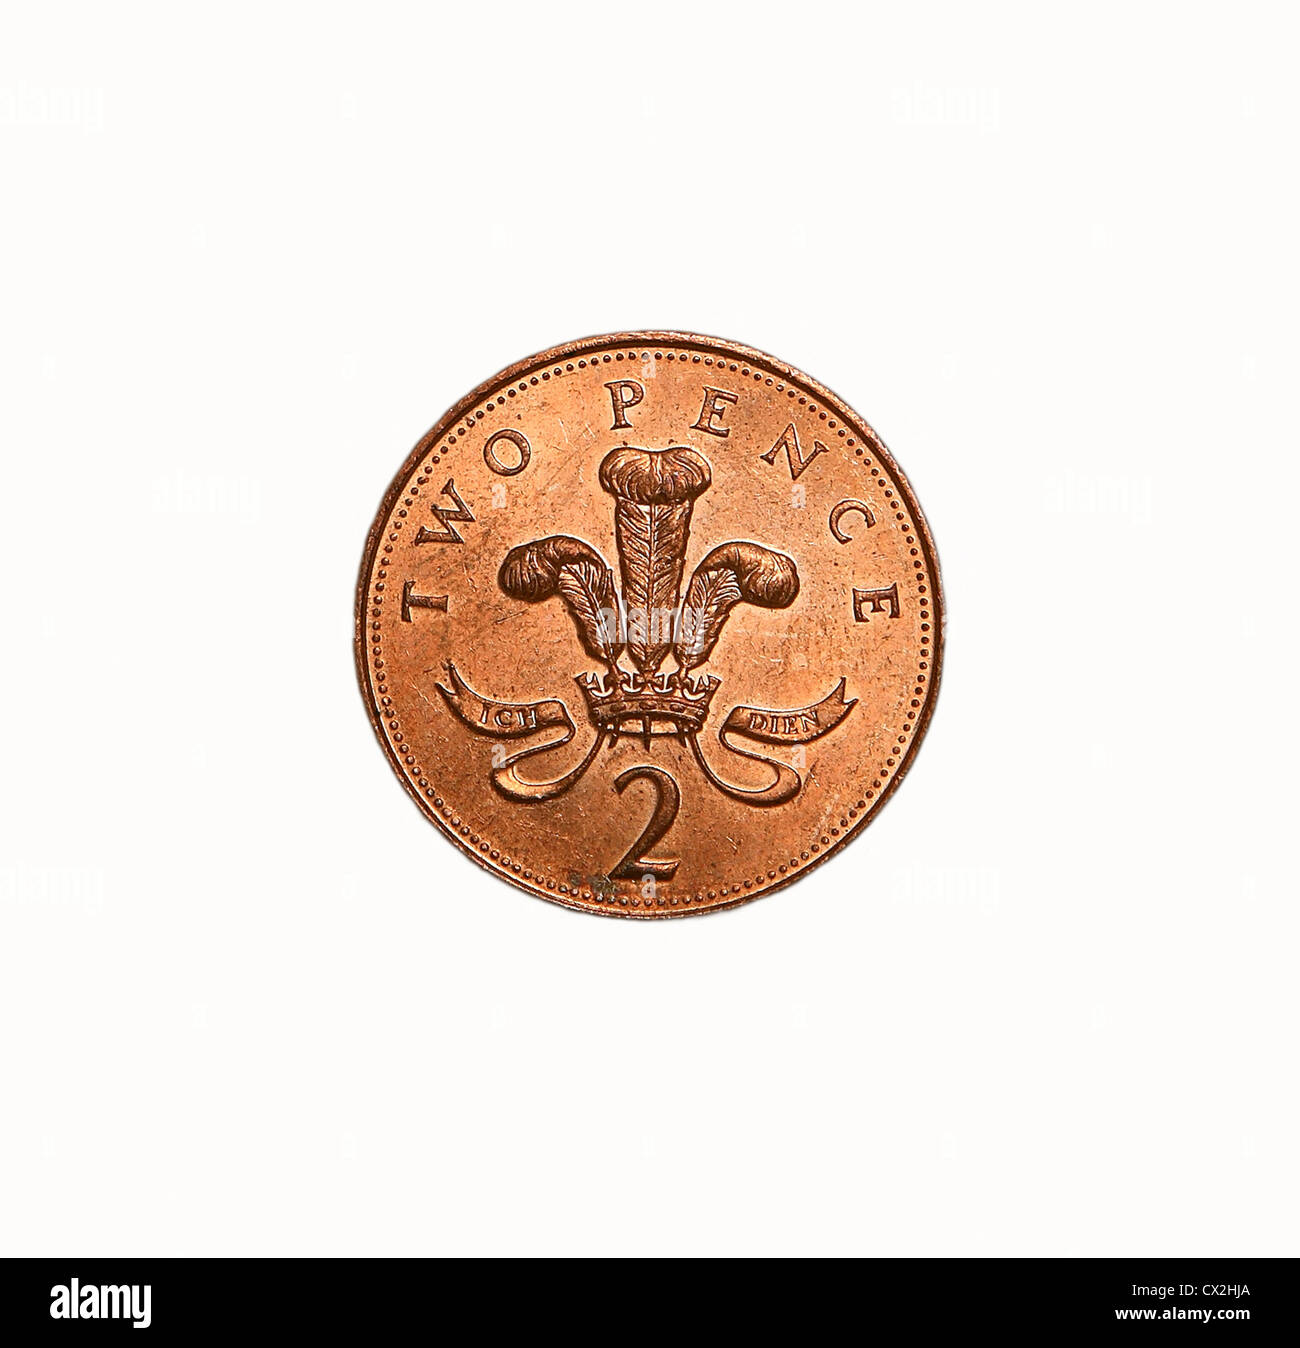 British 2 pence coin cut out onto a white background Stock Photo